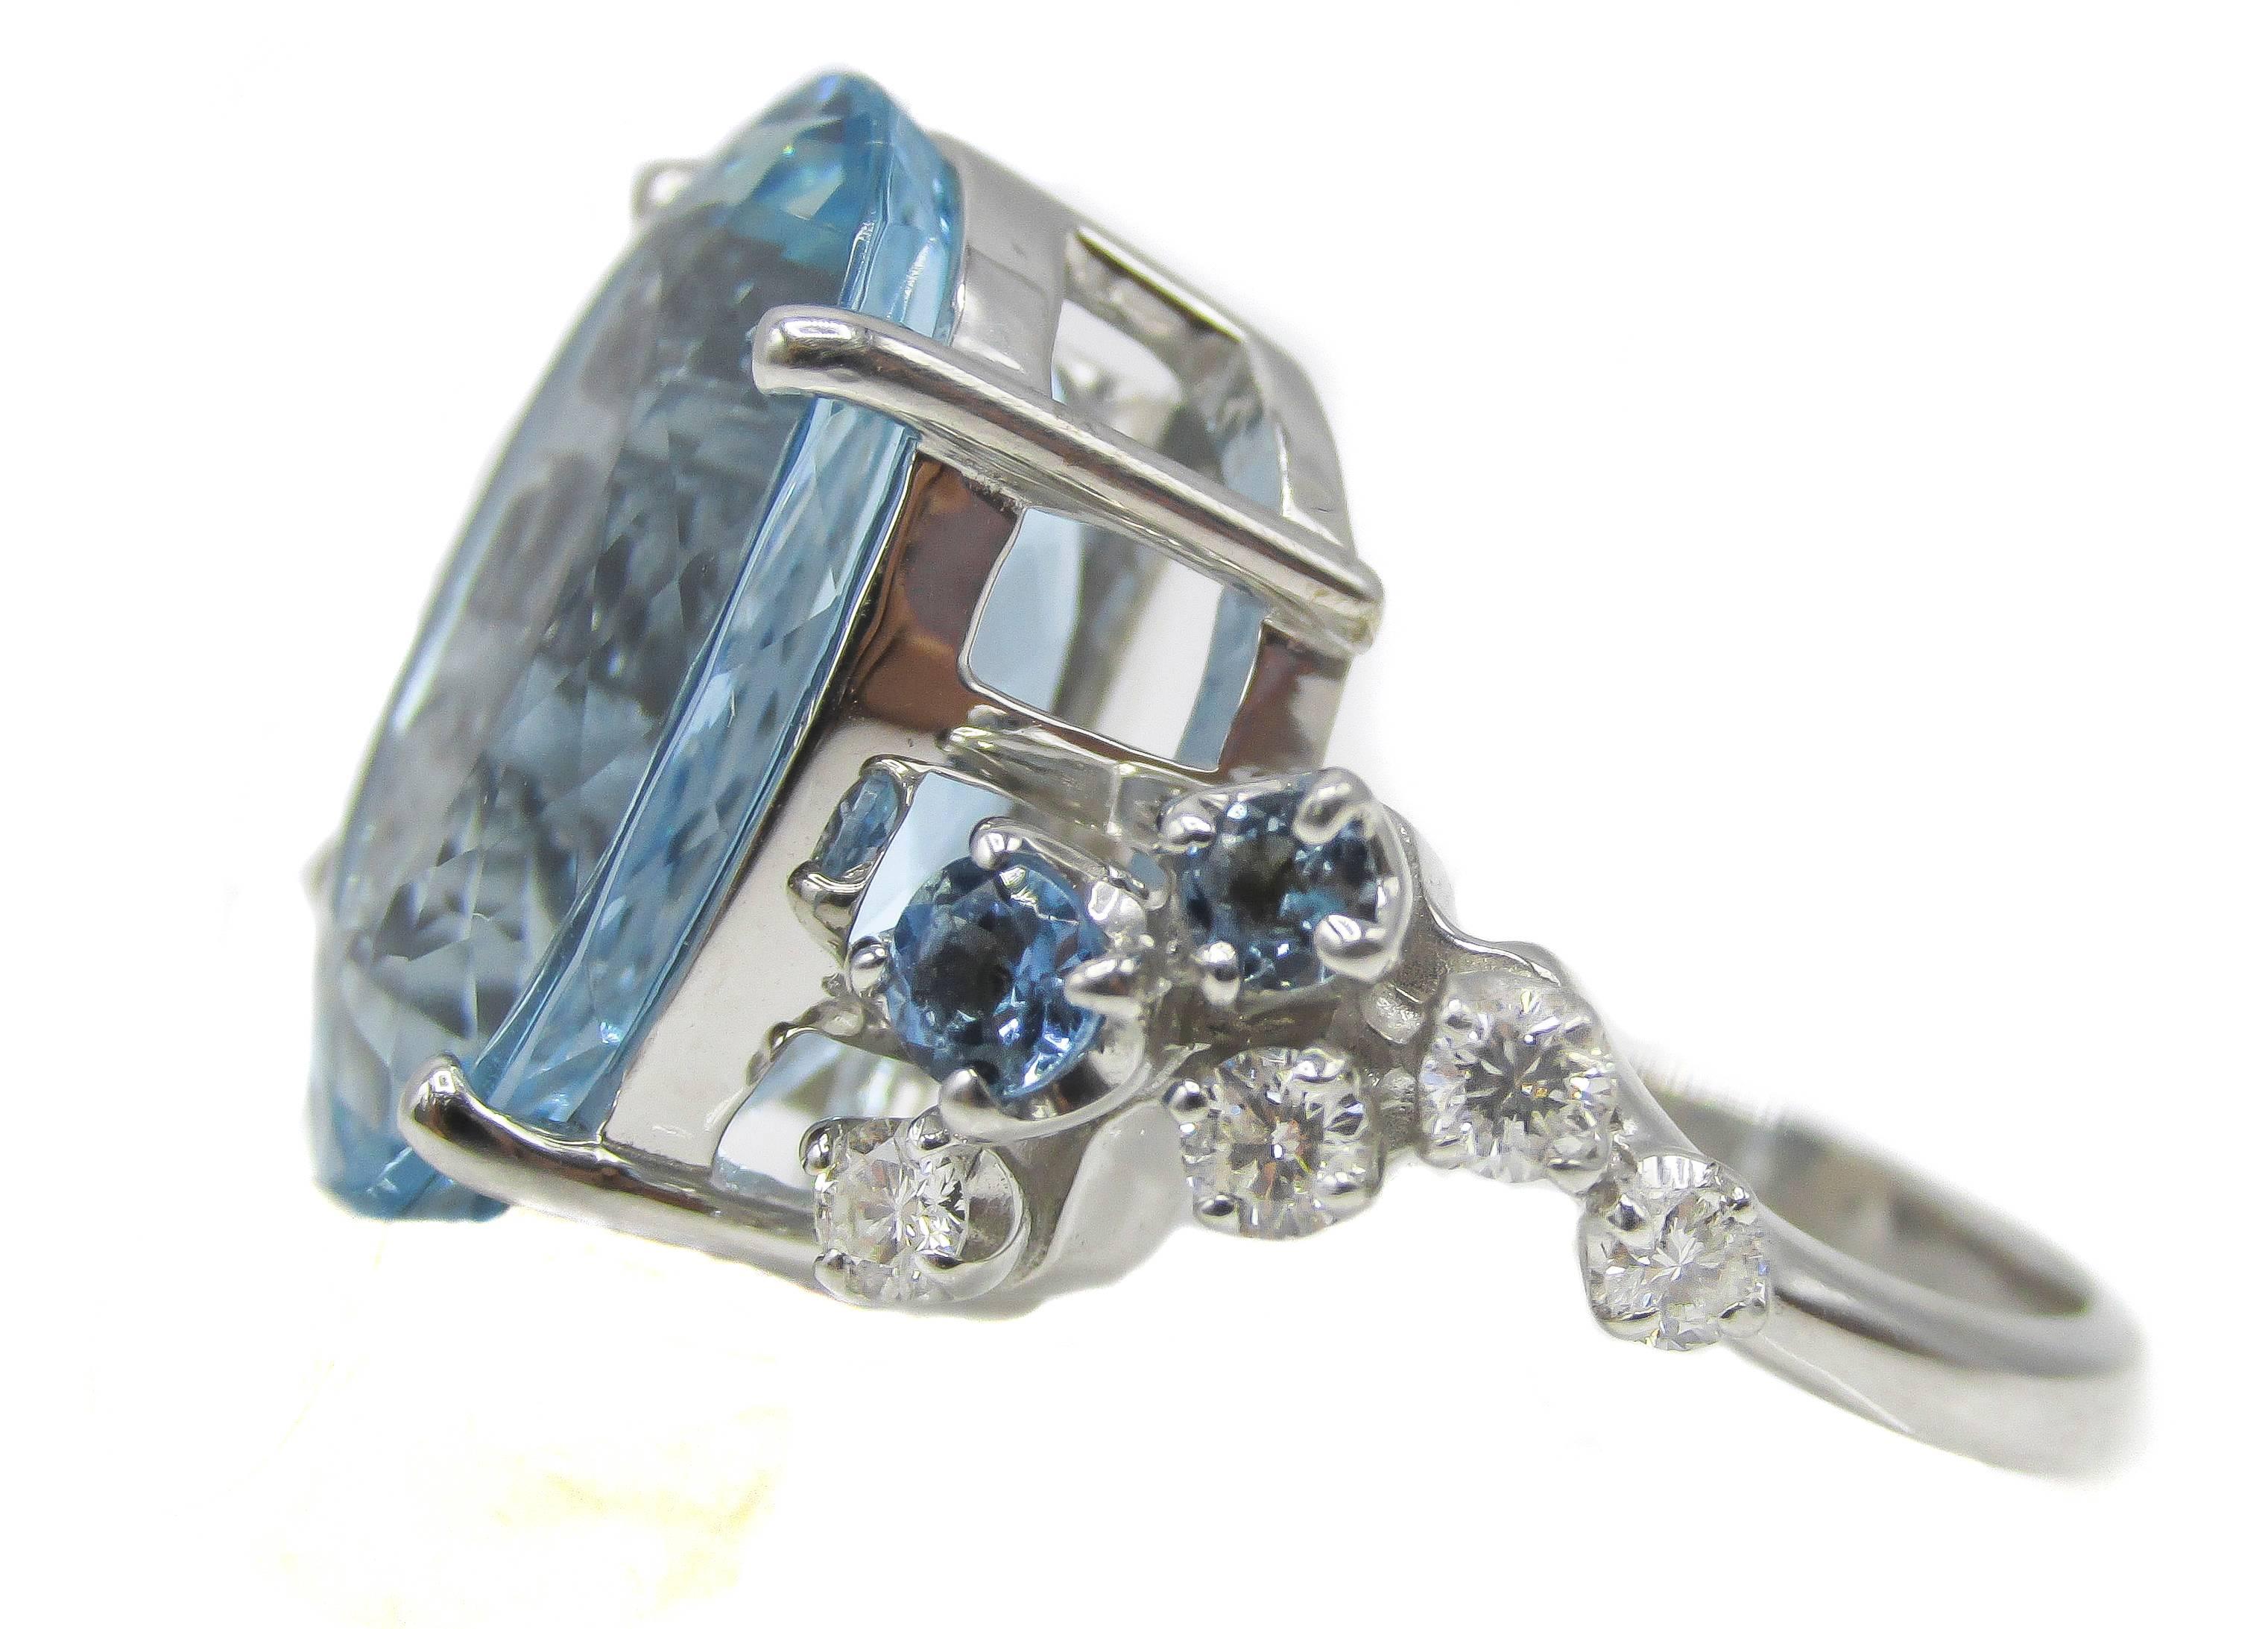 Artistic and lively 18 karat white gold ring centrally set with one extremely brilliant oval sky blue aquamarine weighing 9.65 carats. The shanks of this ring are playfully designed with one side set with 4 round brilliant cut aquamarines and 2